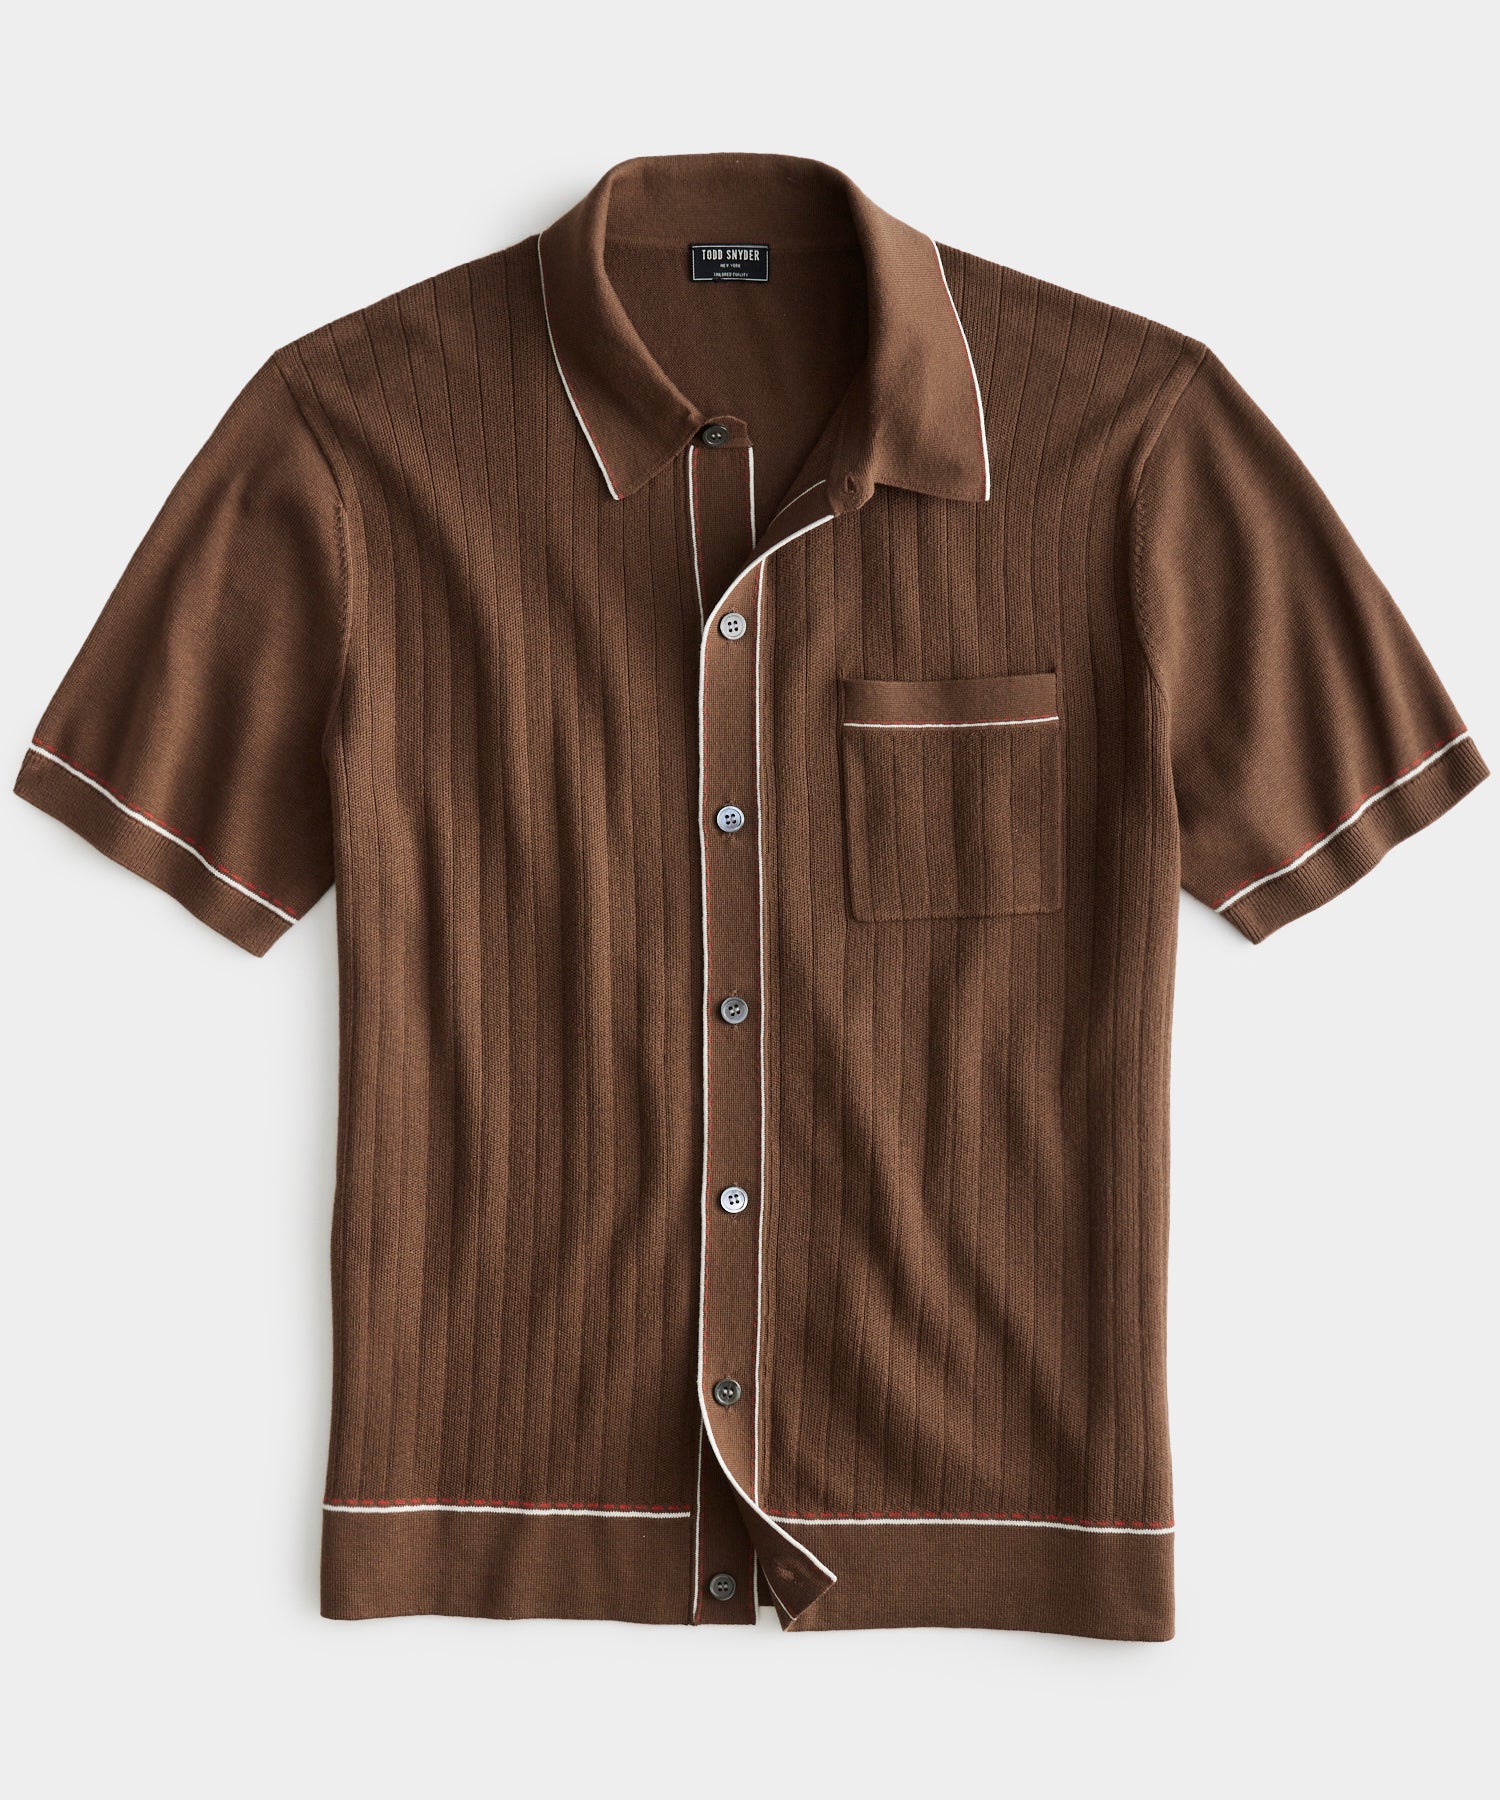 Todd Snyder - TODD SNYDER COTTON SILK SHORT SLEEVE FULL PLACKET RIVIERA POLO IN SADDLE BROWN - Rent With Thred